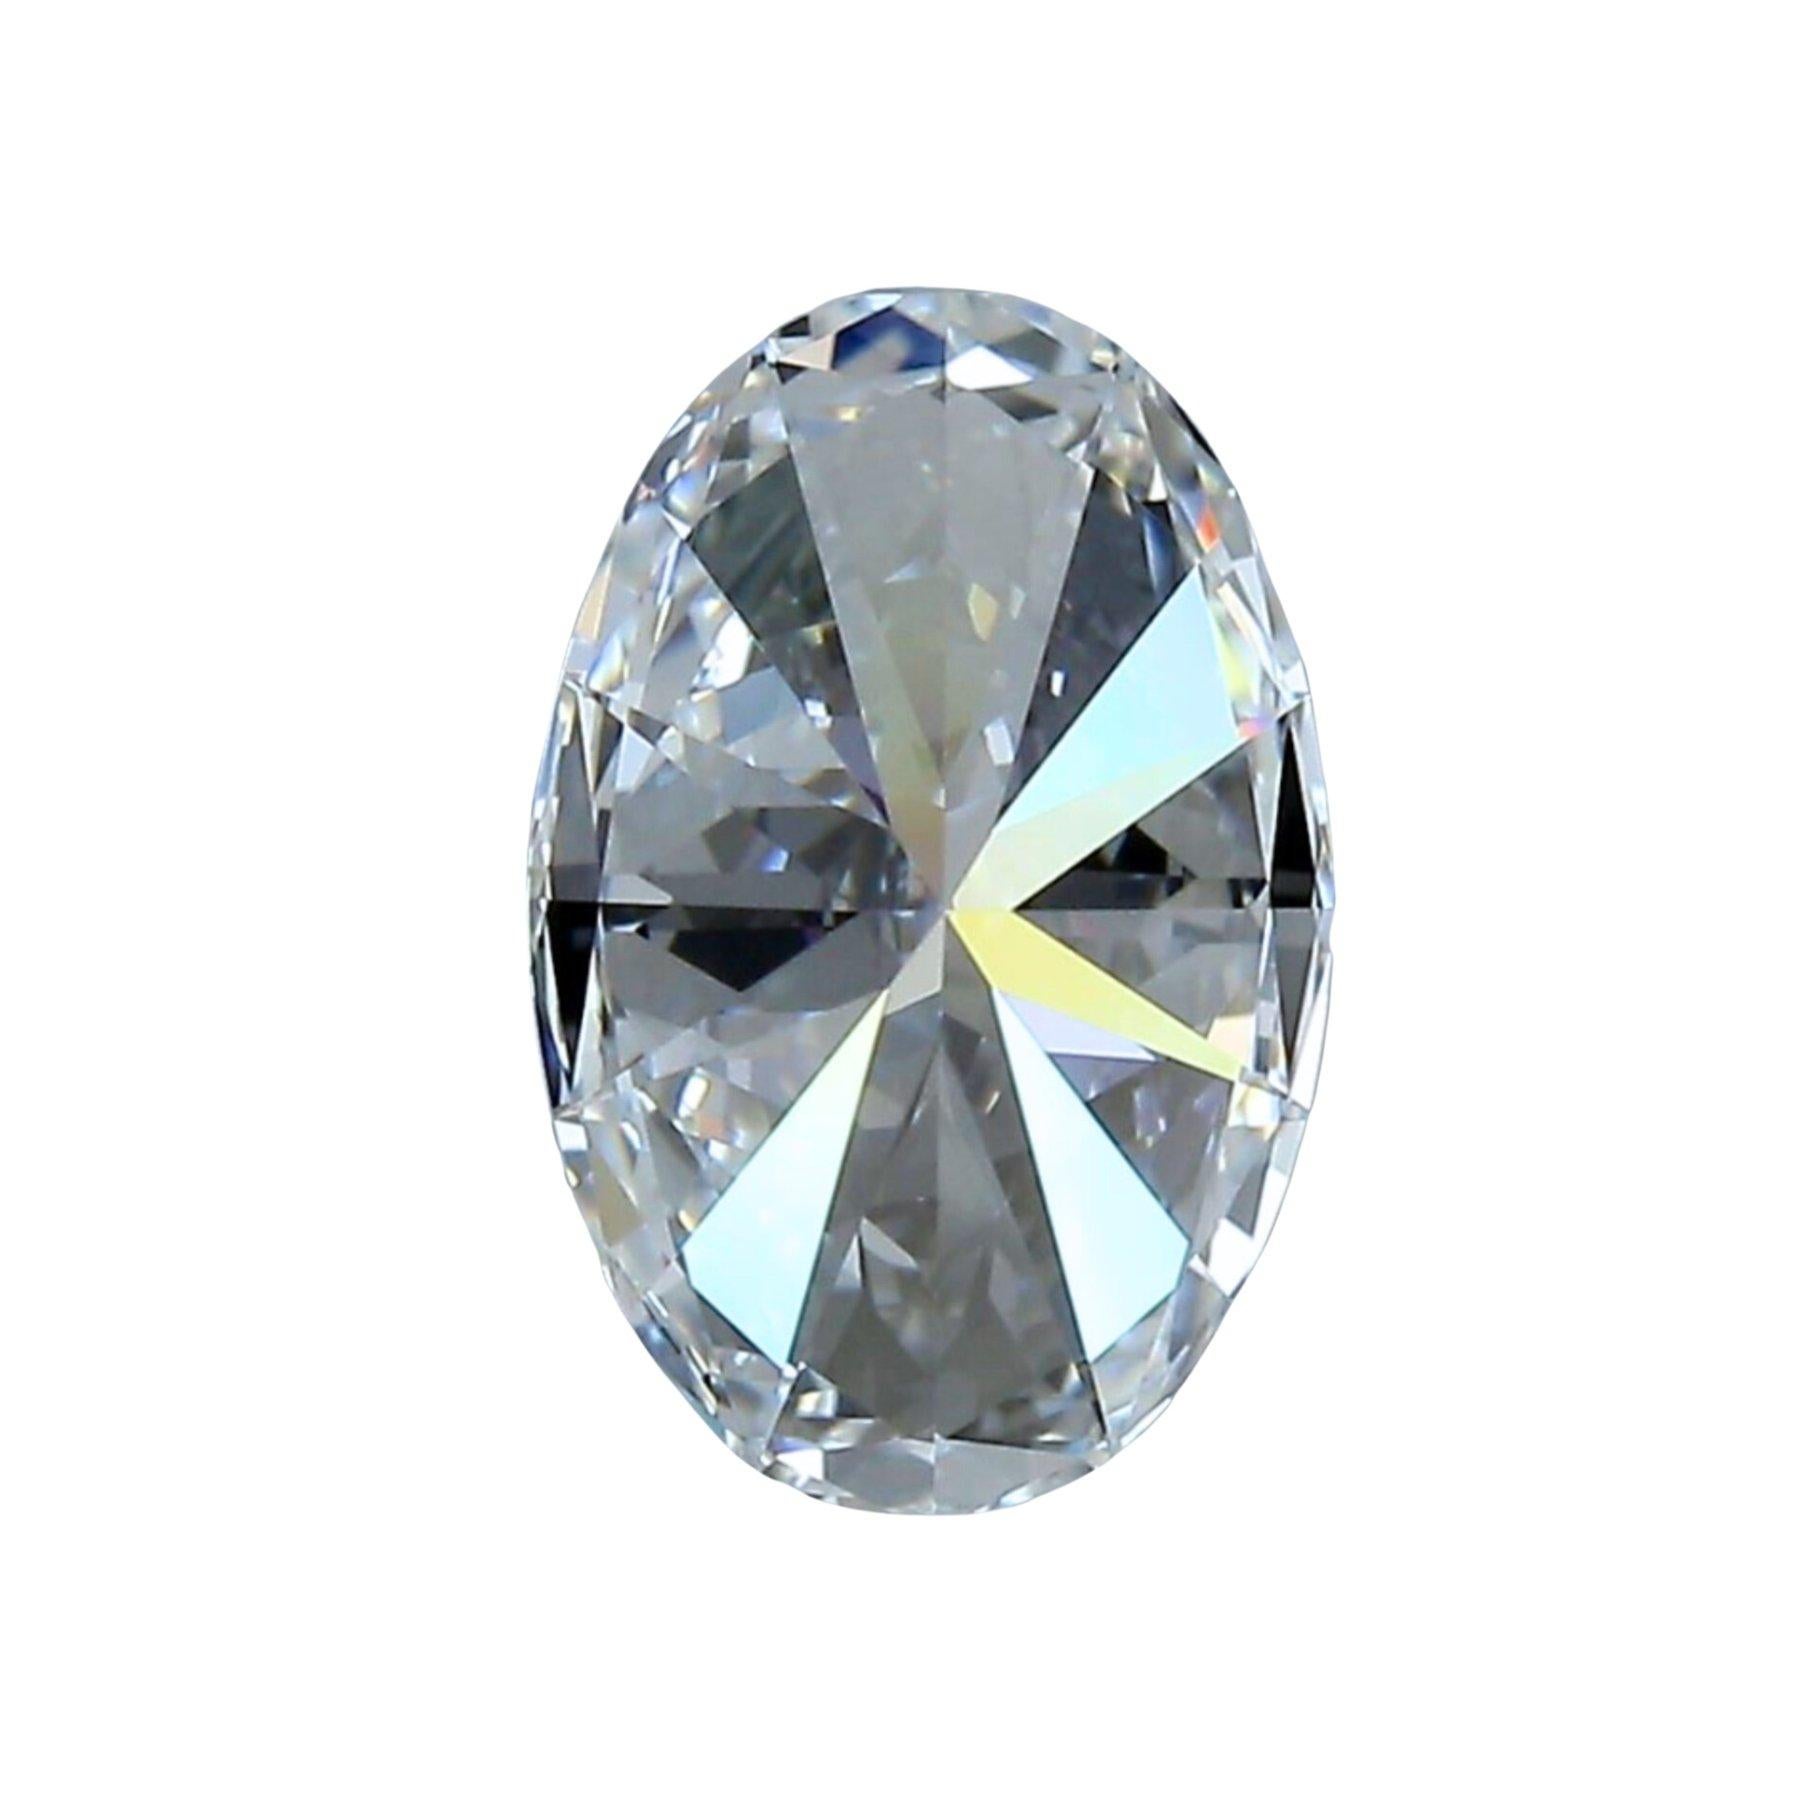 Women's Magnificent 0.72 ct Ideal Cut Oval Diamond - GIA Certified